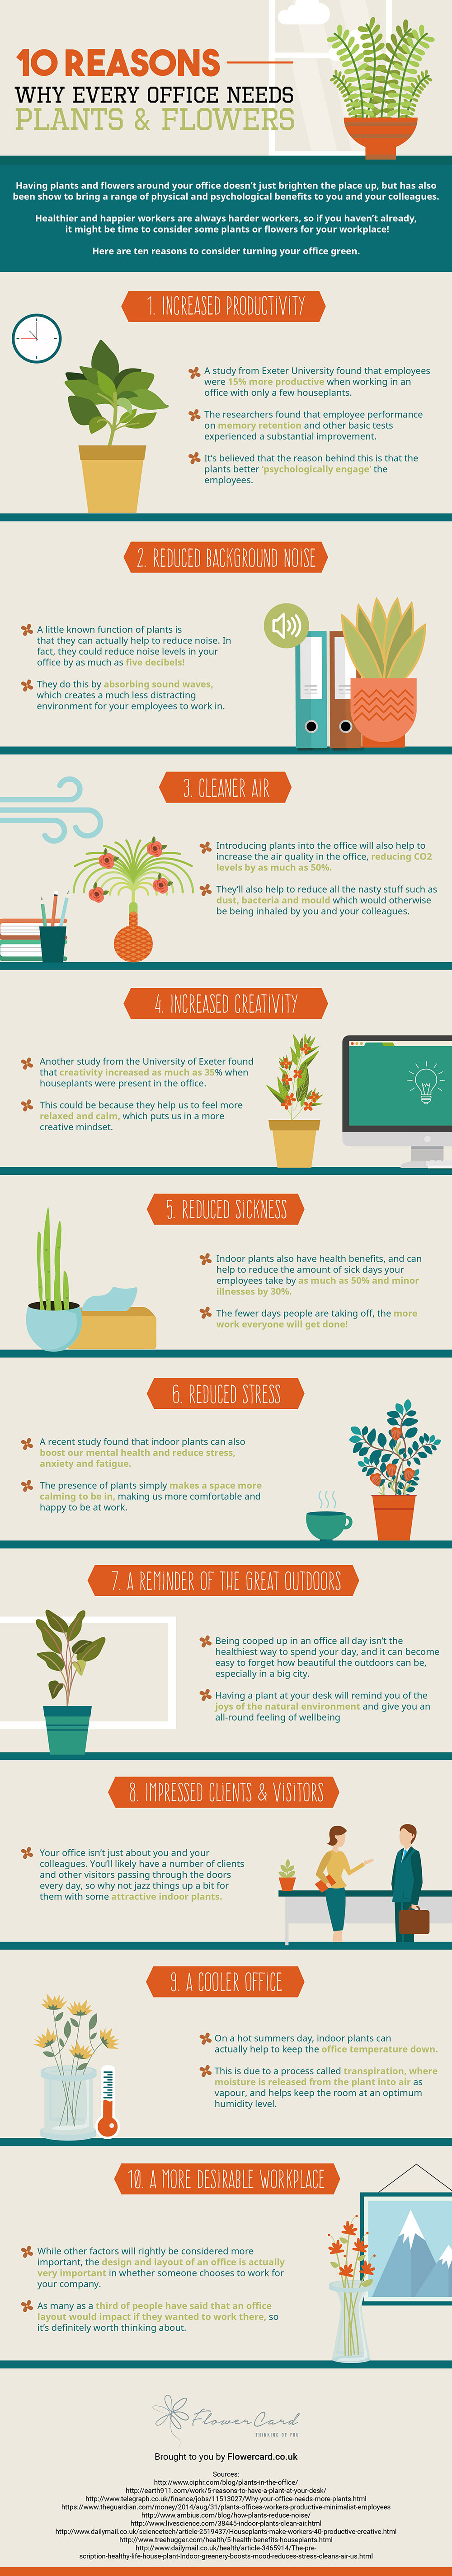 10 Reasons Why Every Office Needs Plants and Flowers